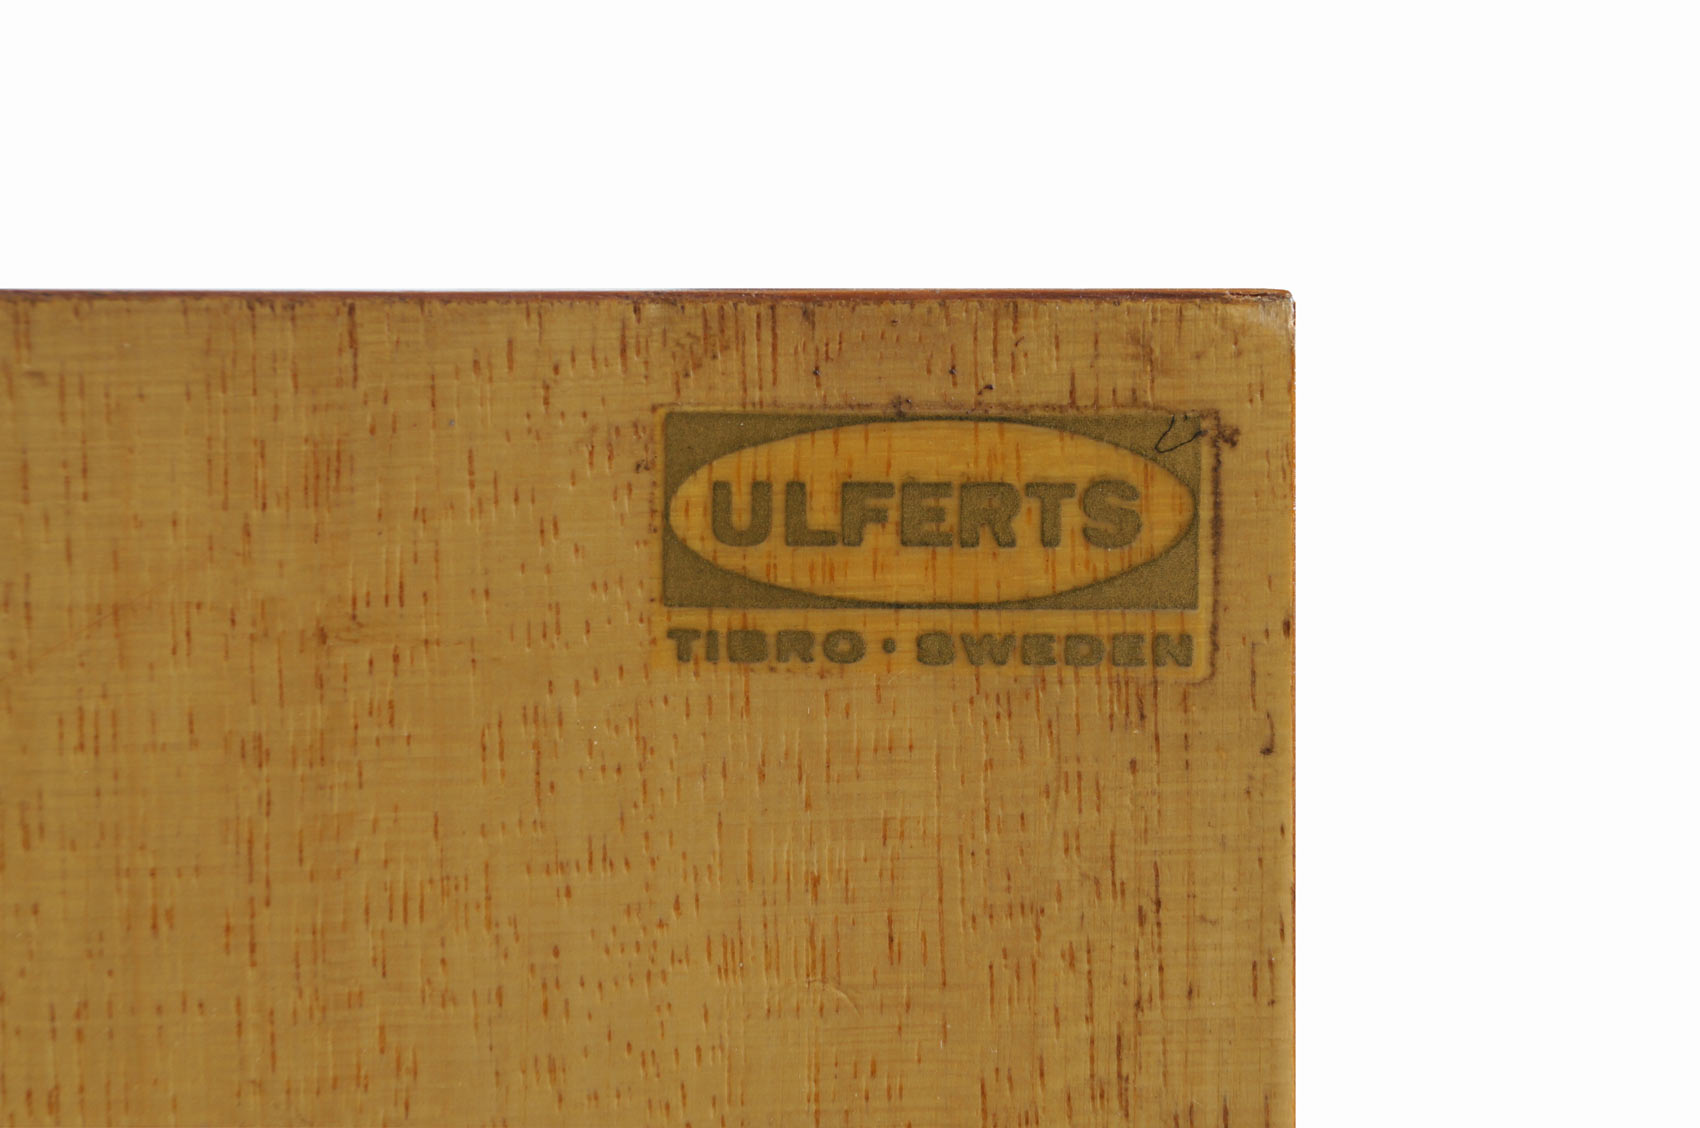 Swedish Teak Sideboard by Tage Olofsson for Ulferts Mobler